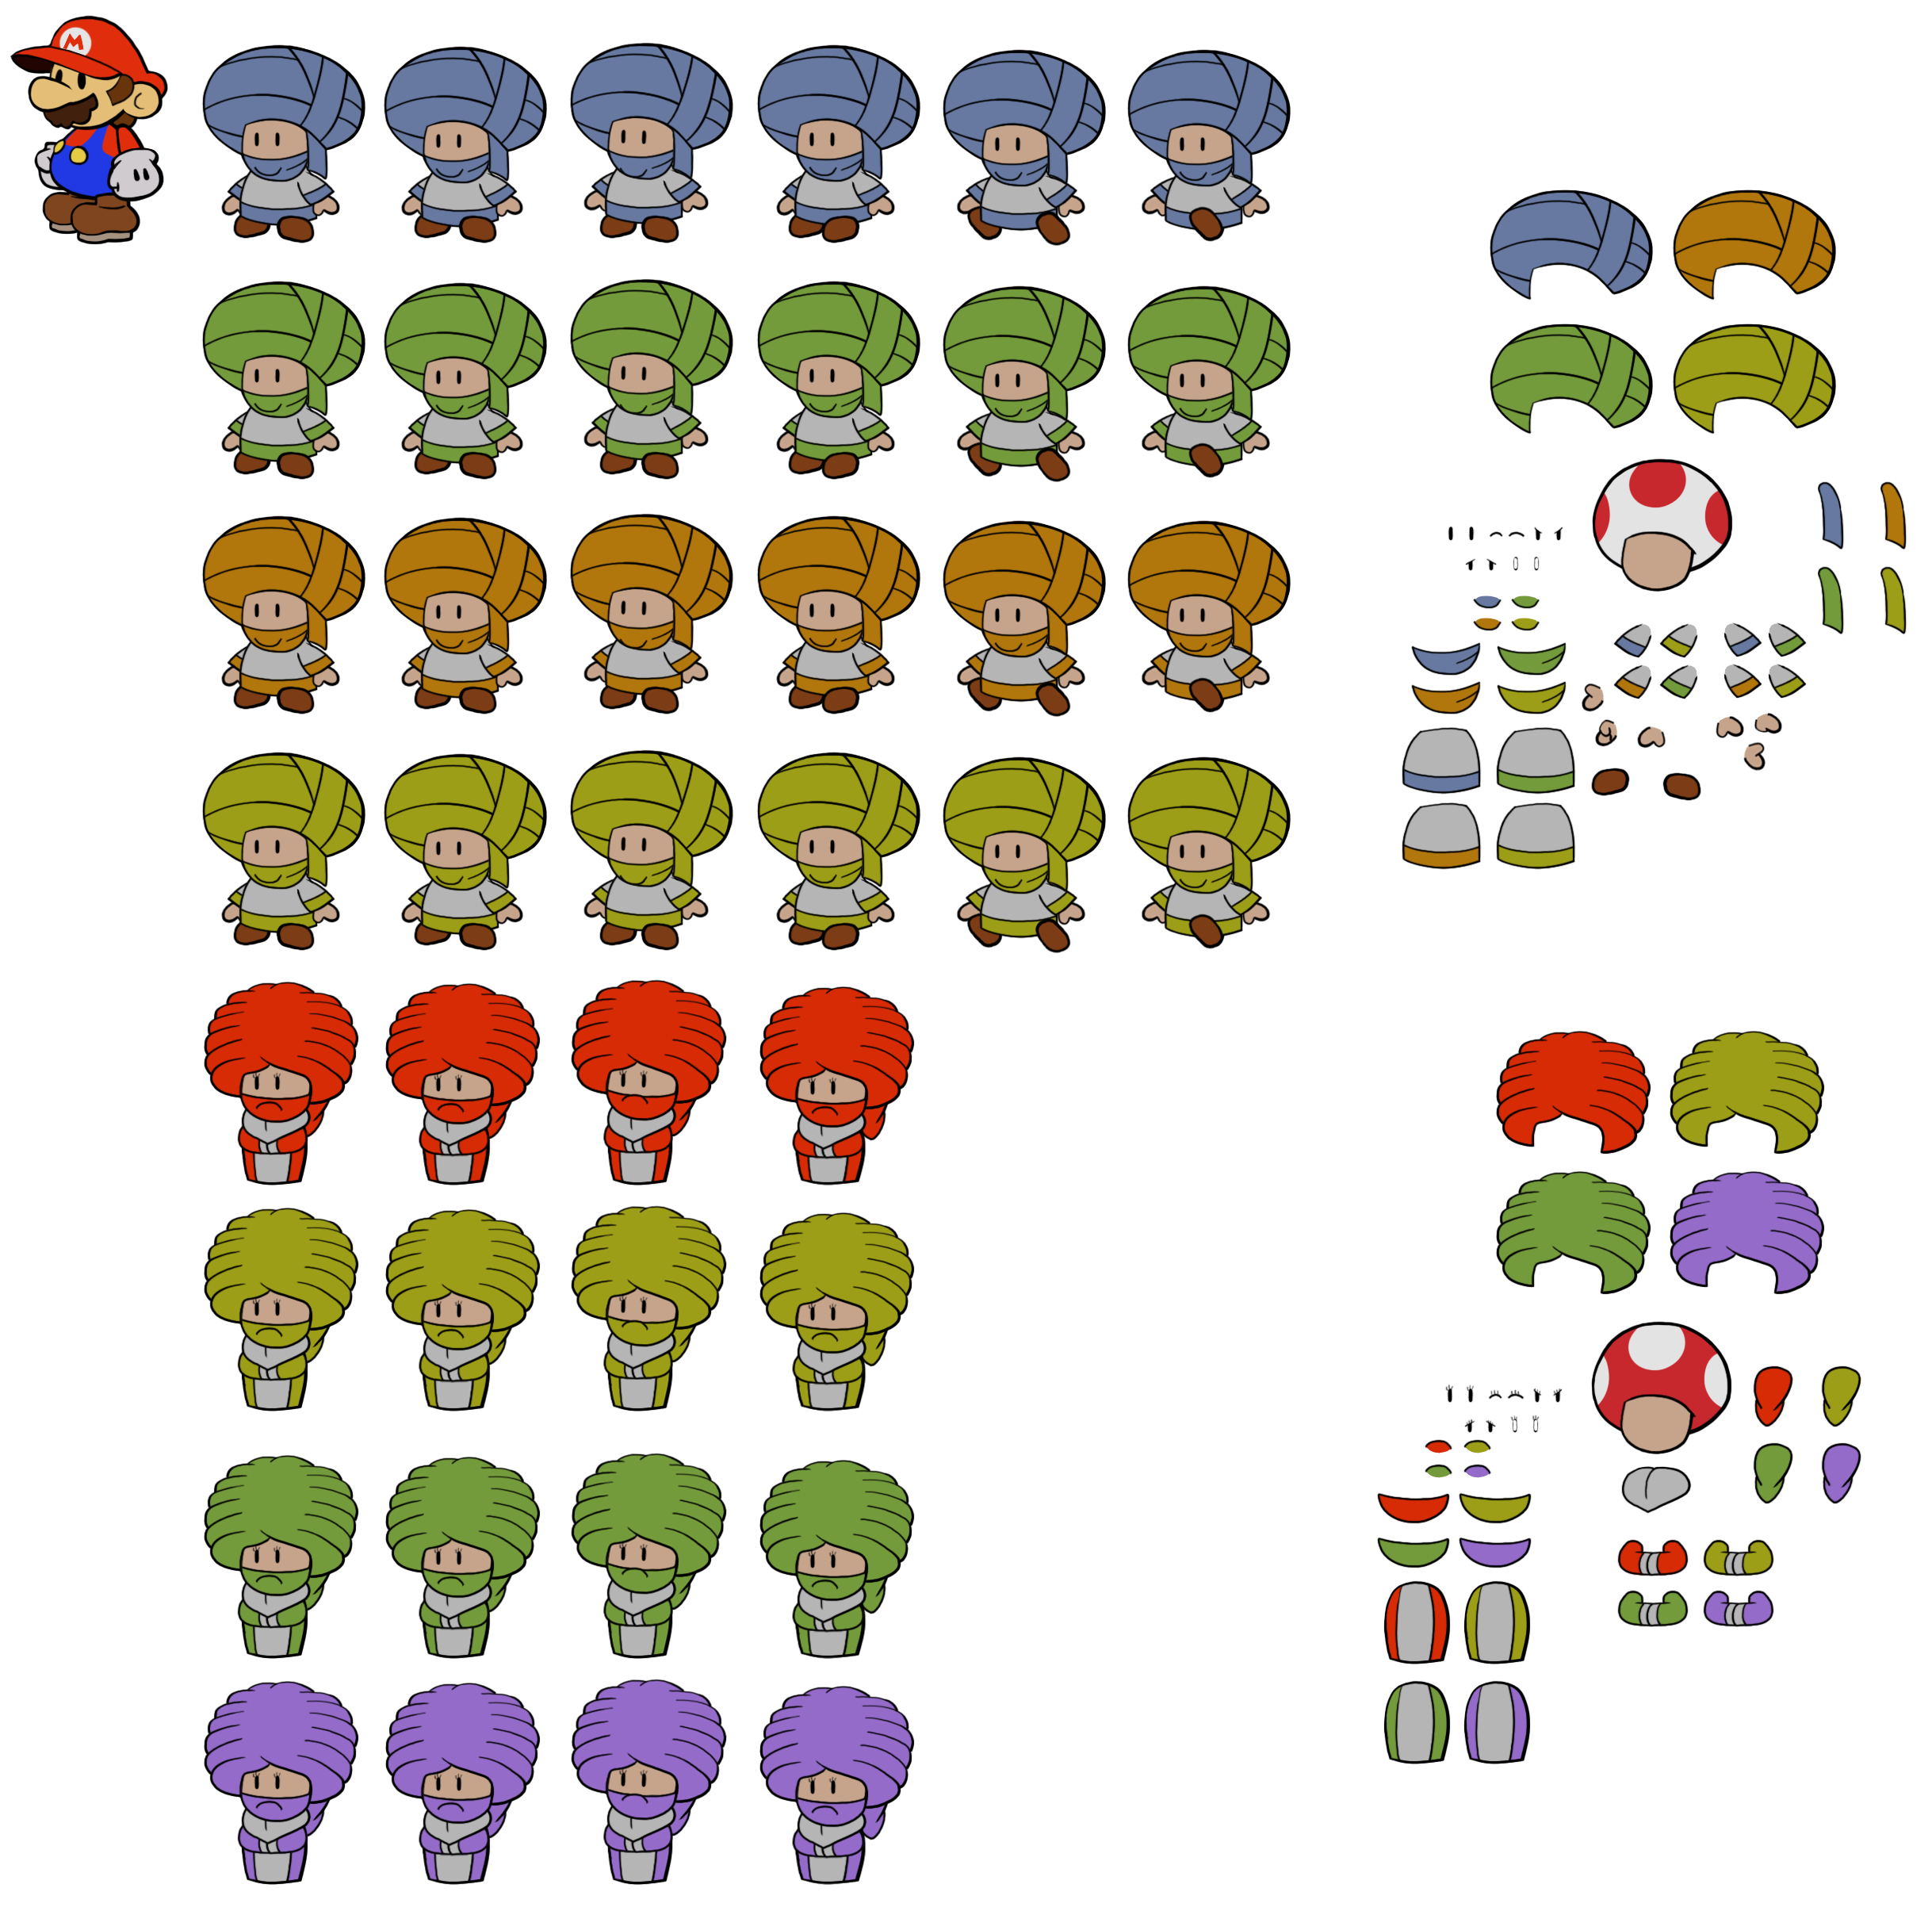 Dry Dry Toads (Paper Mario-Style)